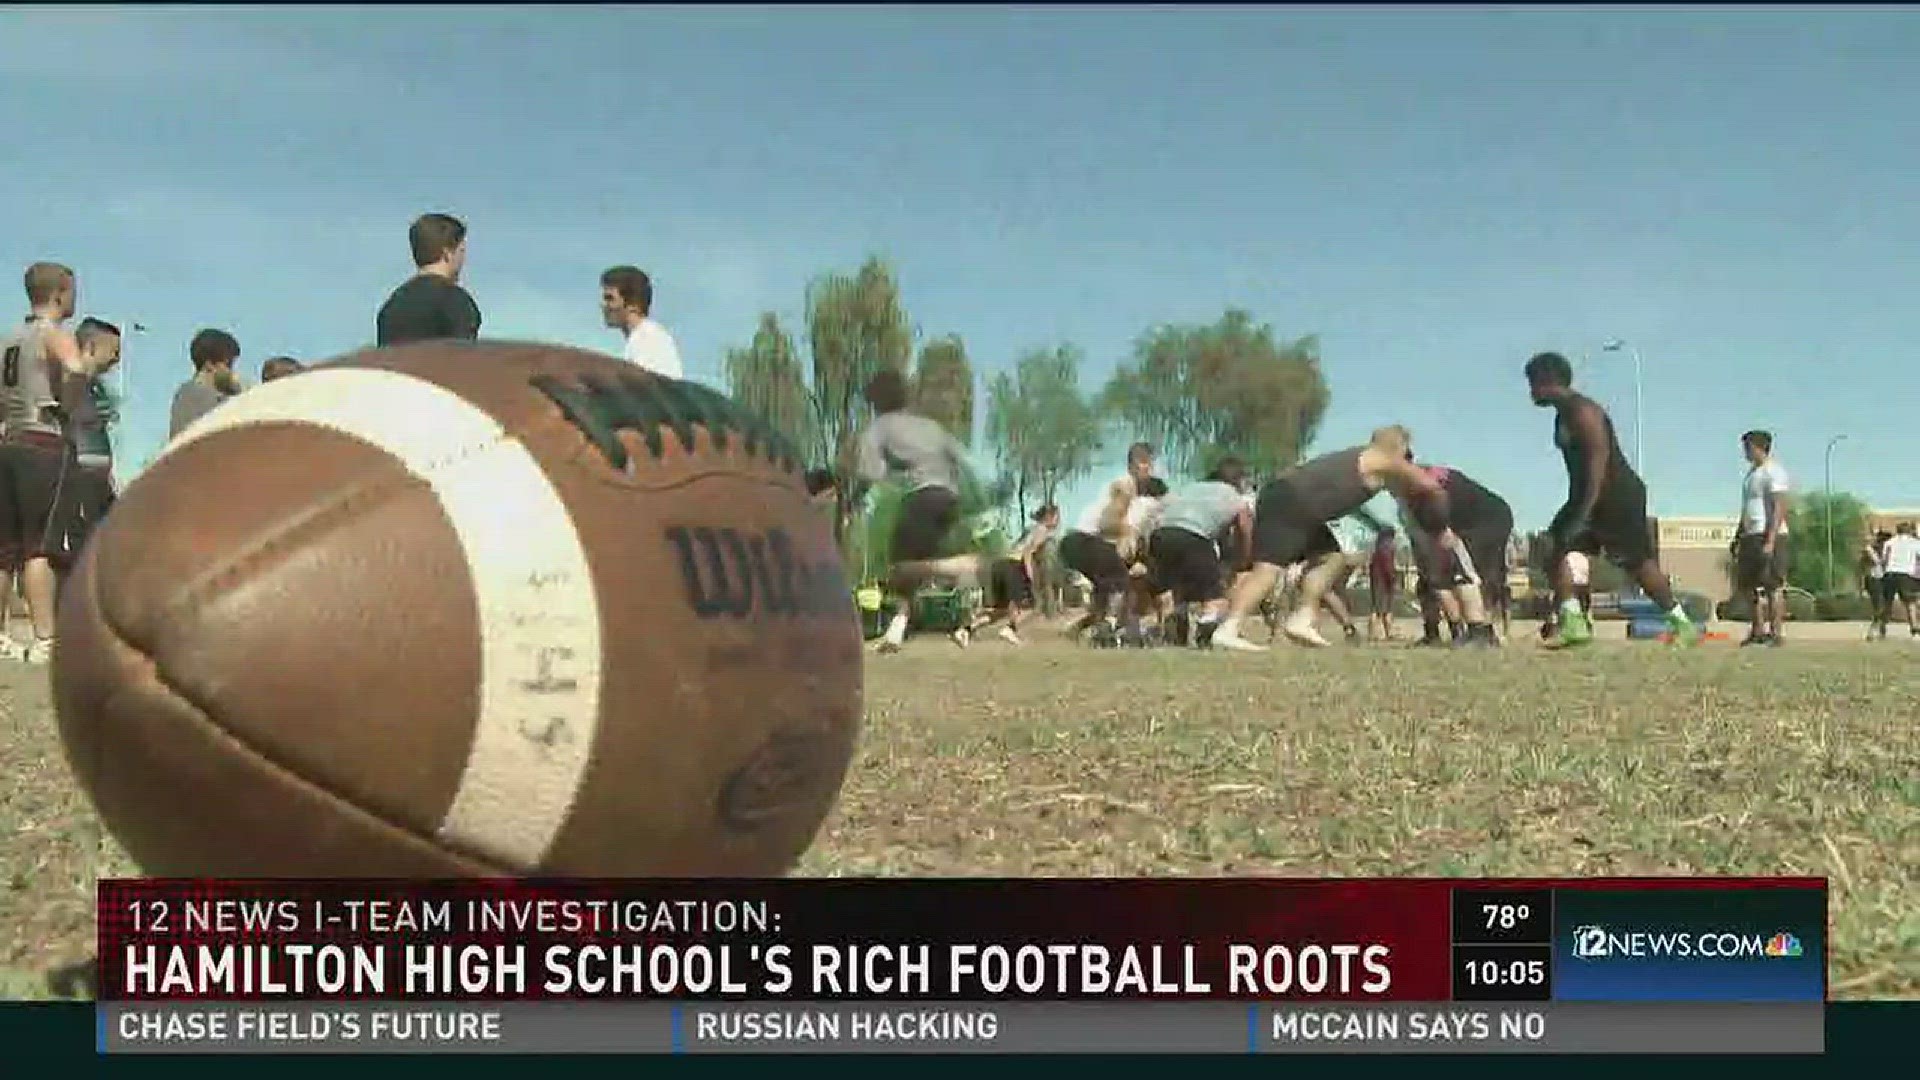 The events that lead the Hamilton High School alleged football hazing abuse to where it is today.